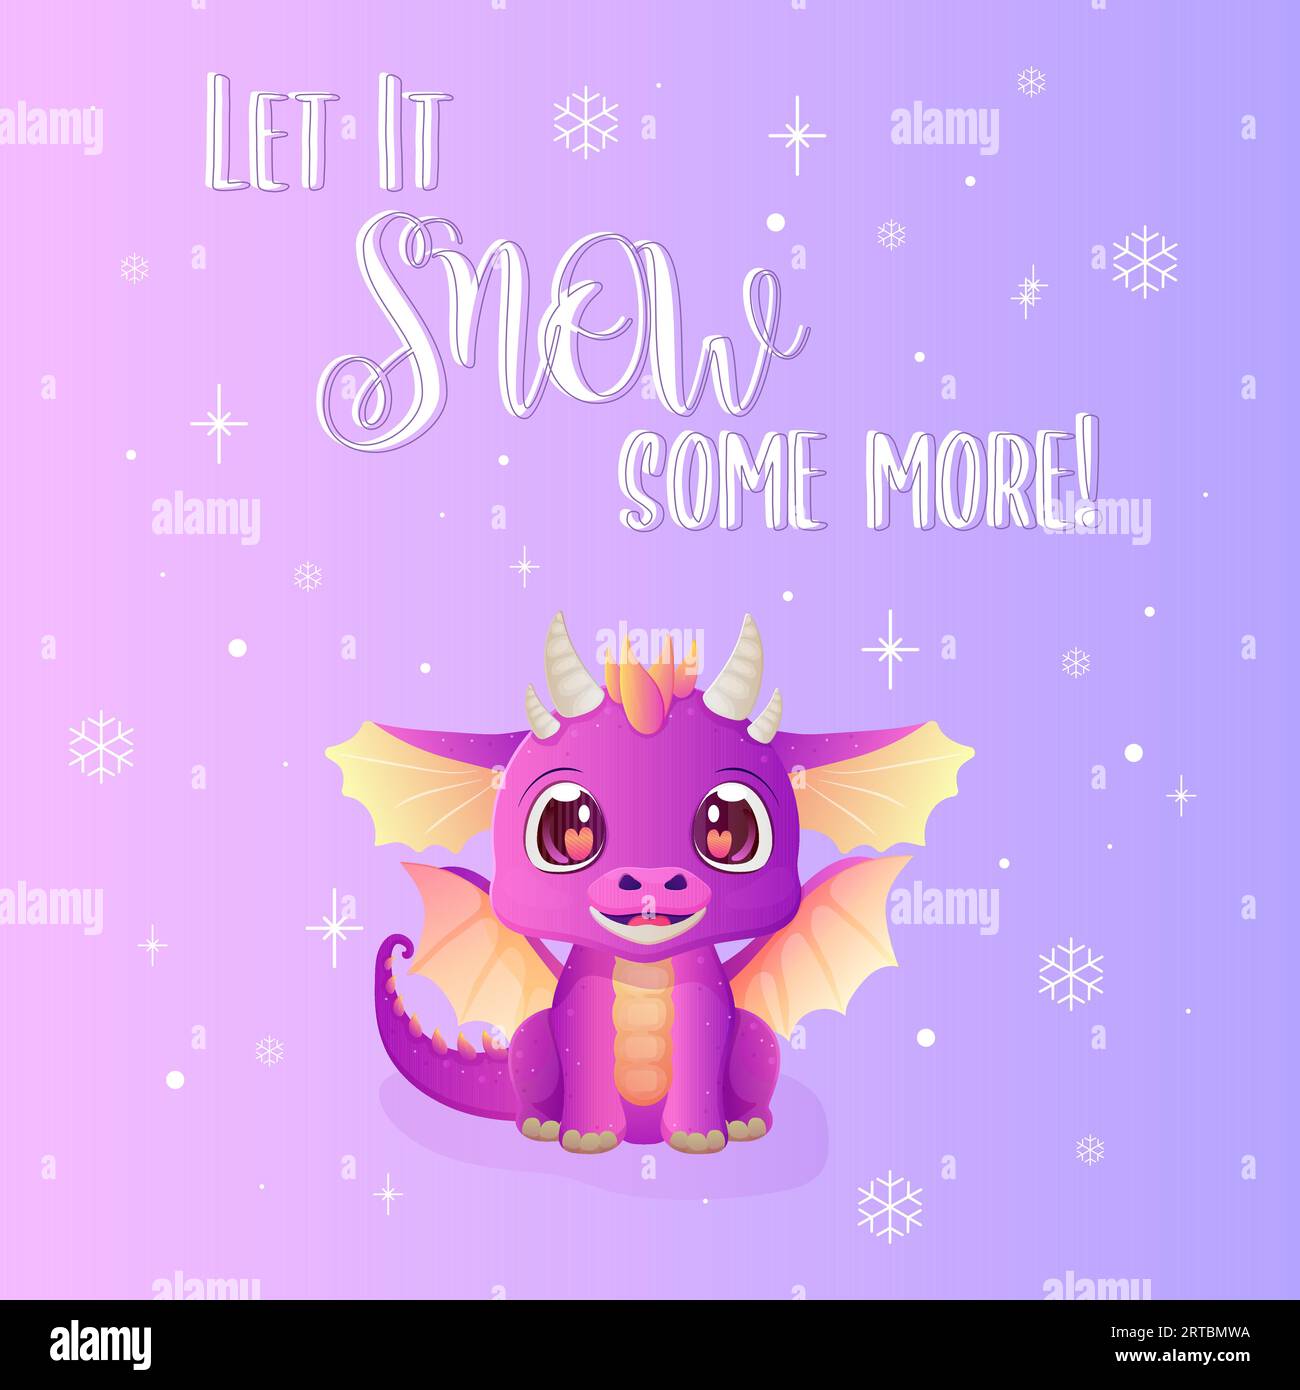 a happy new year card with a cute dragon. Vector illustration purple background Stock Vector